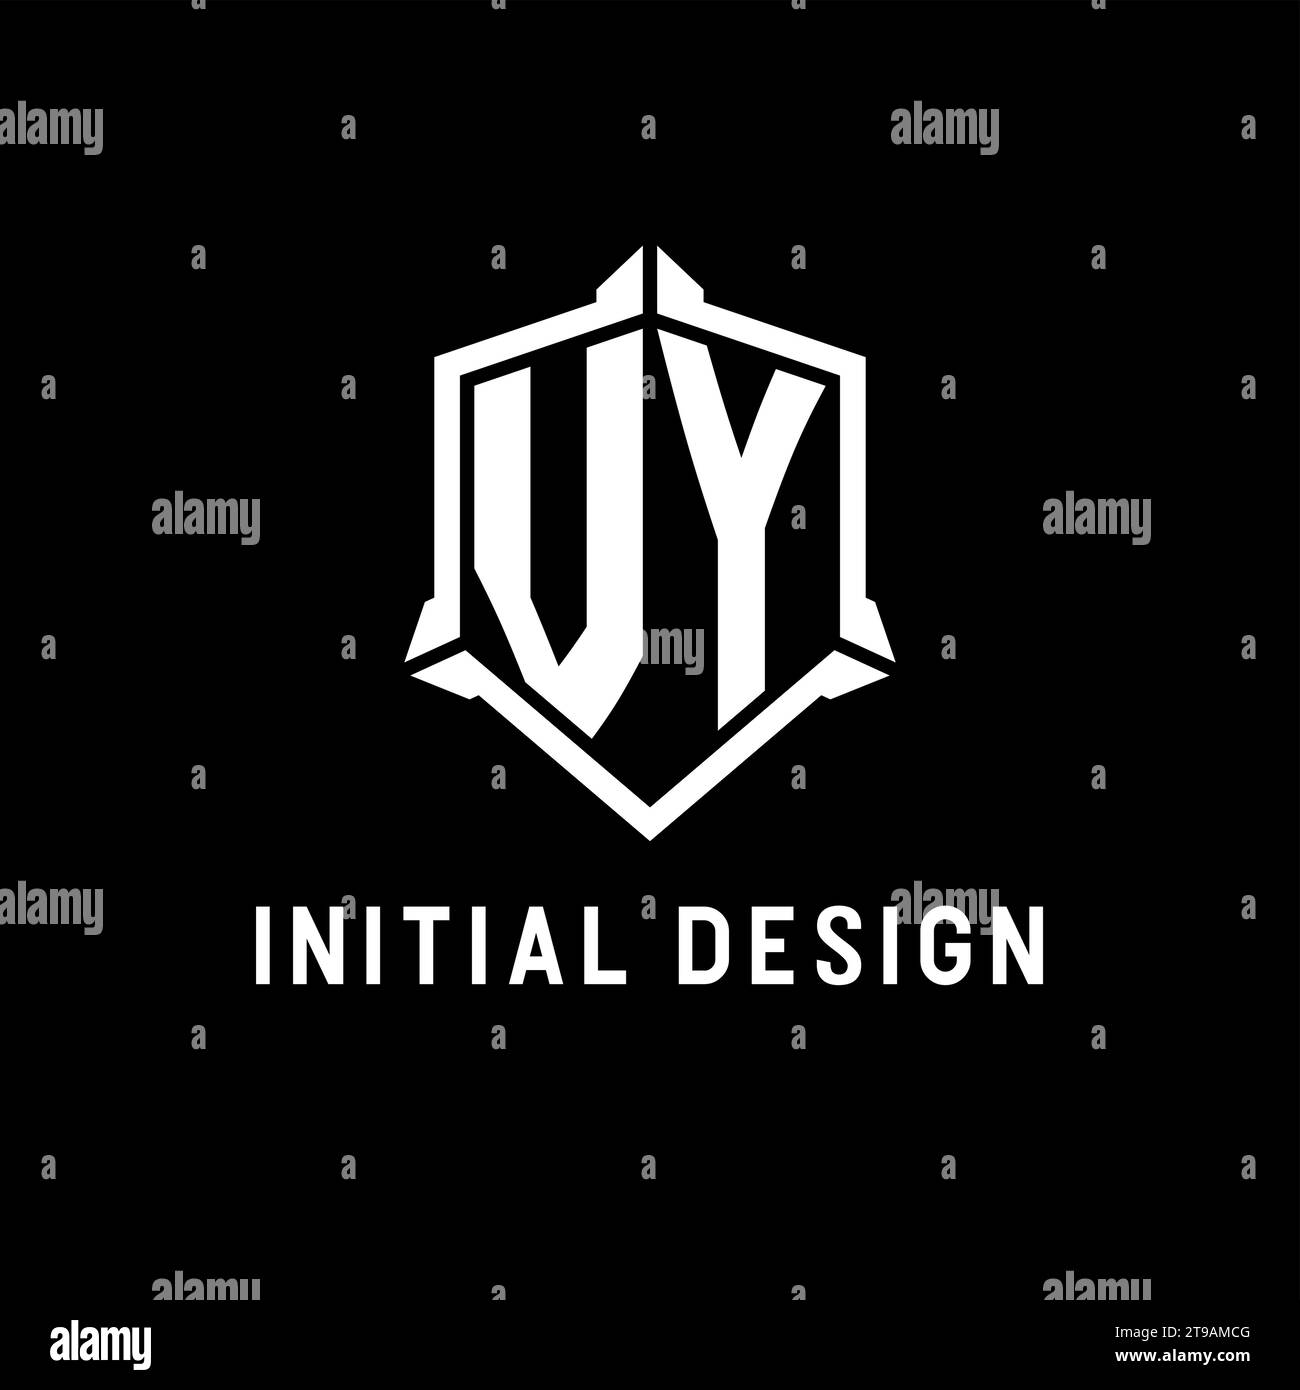 VY logo initial with shield shape design style vector graphic Stock Vector